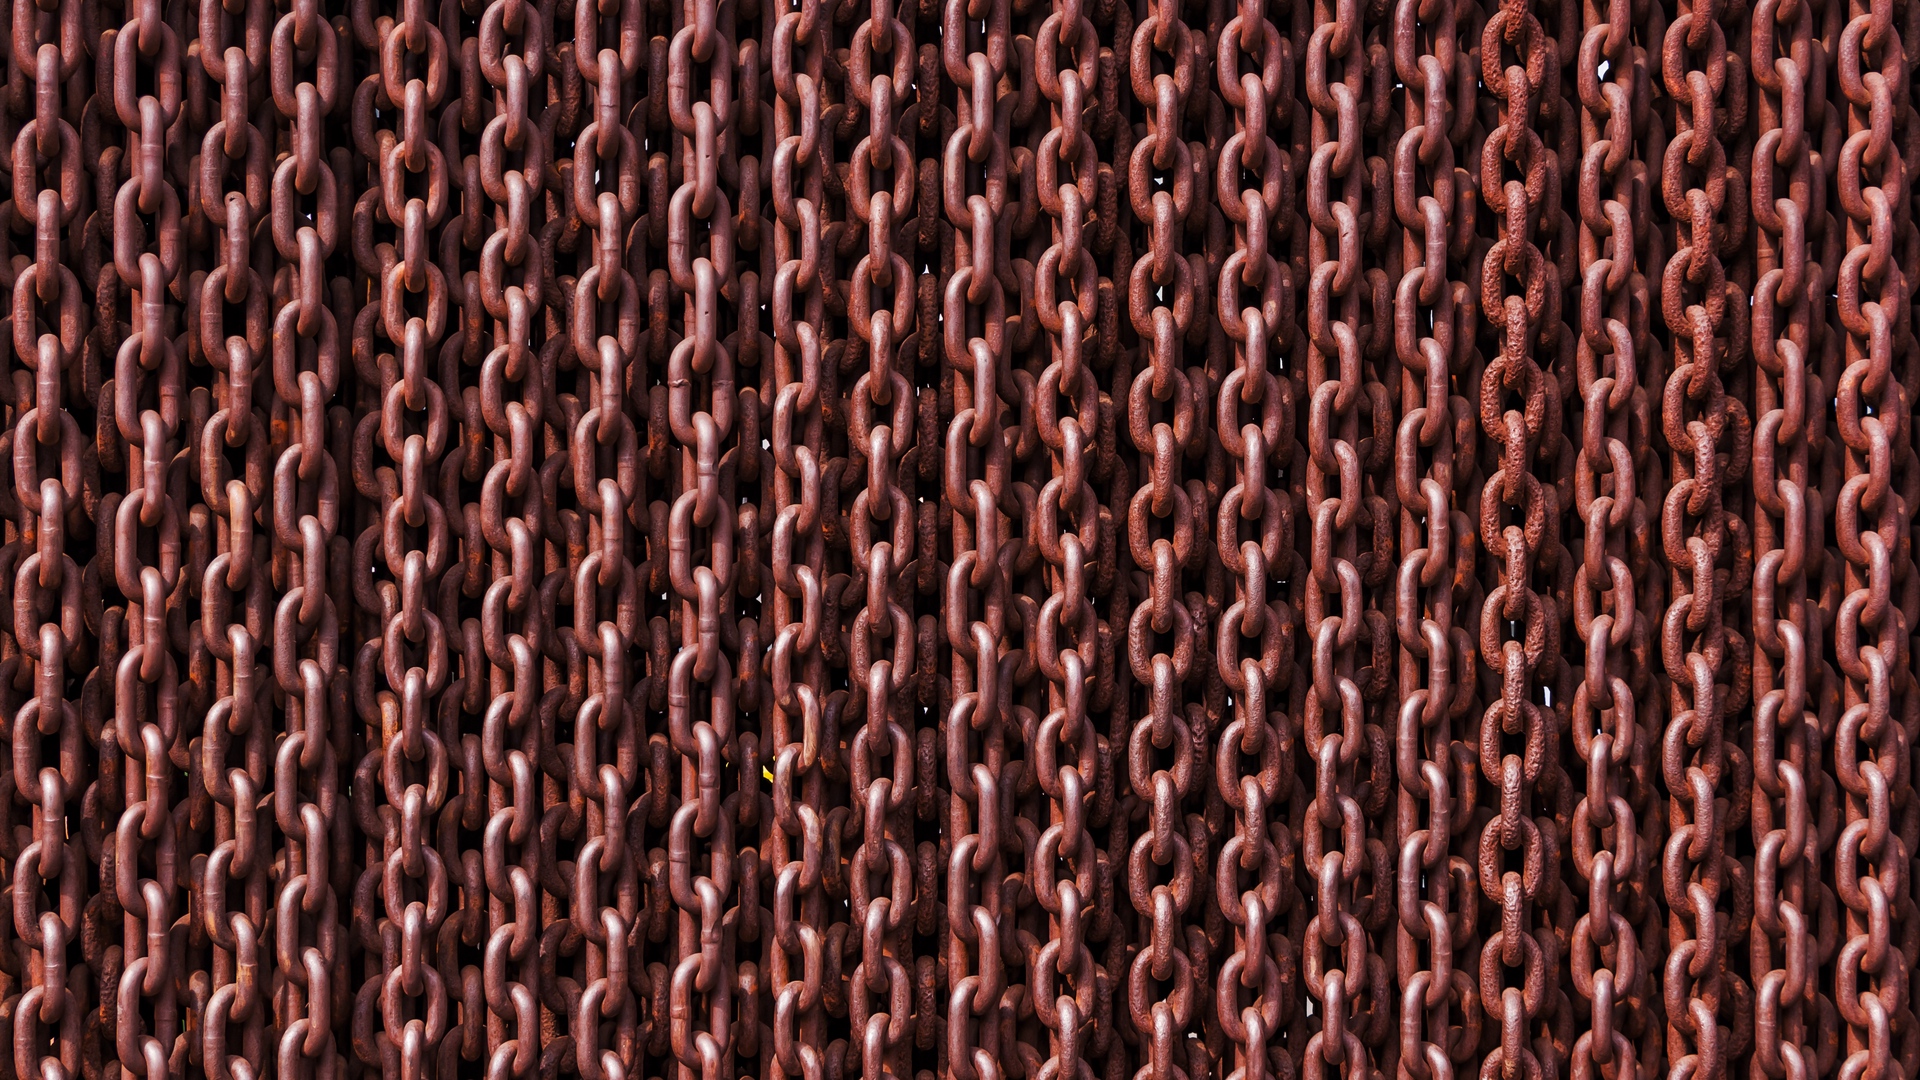 General 1920x1080 chains rust texture